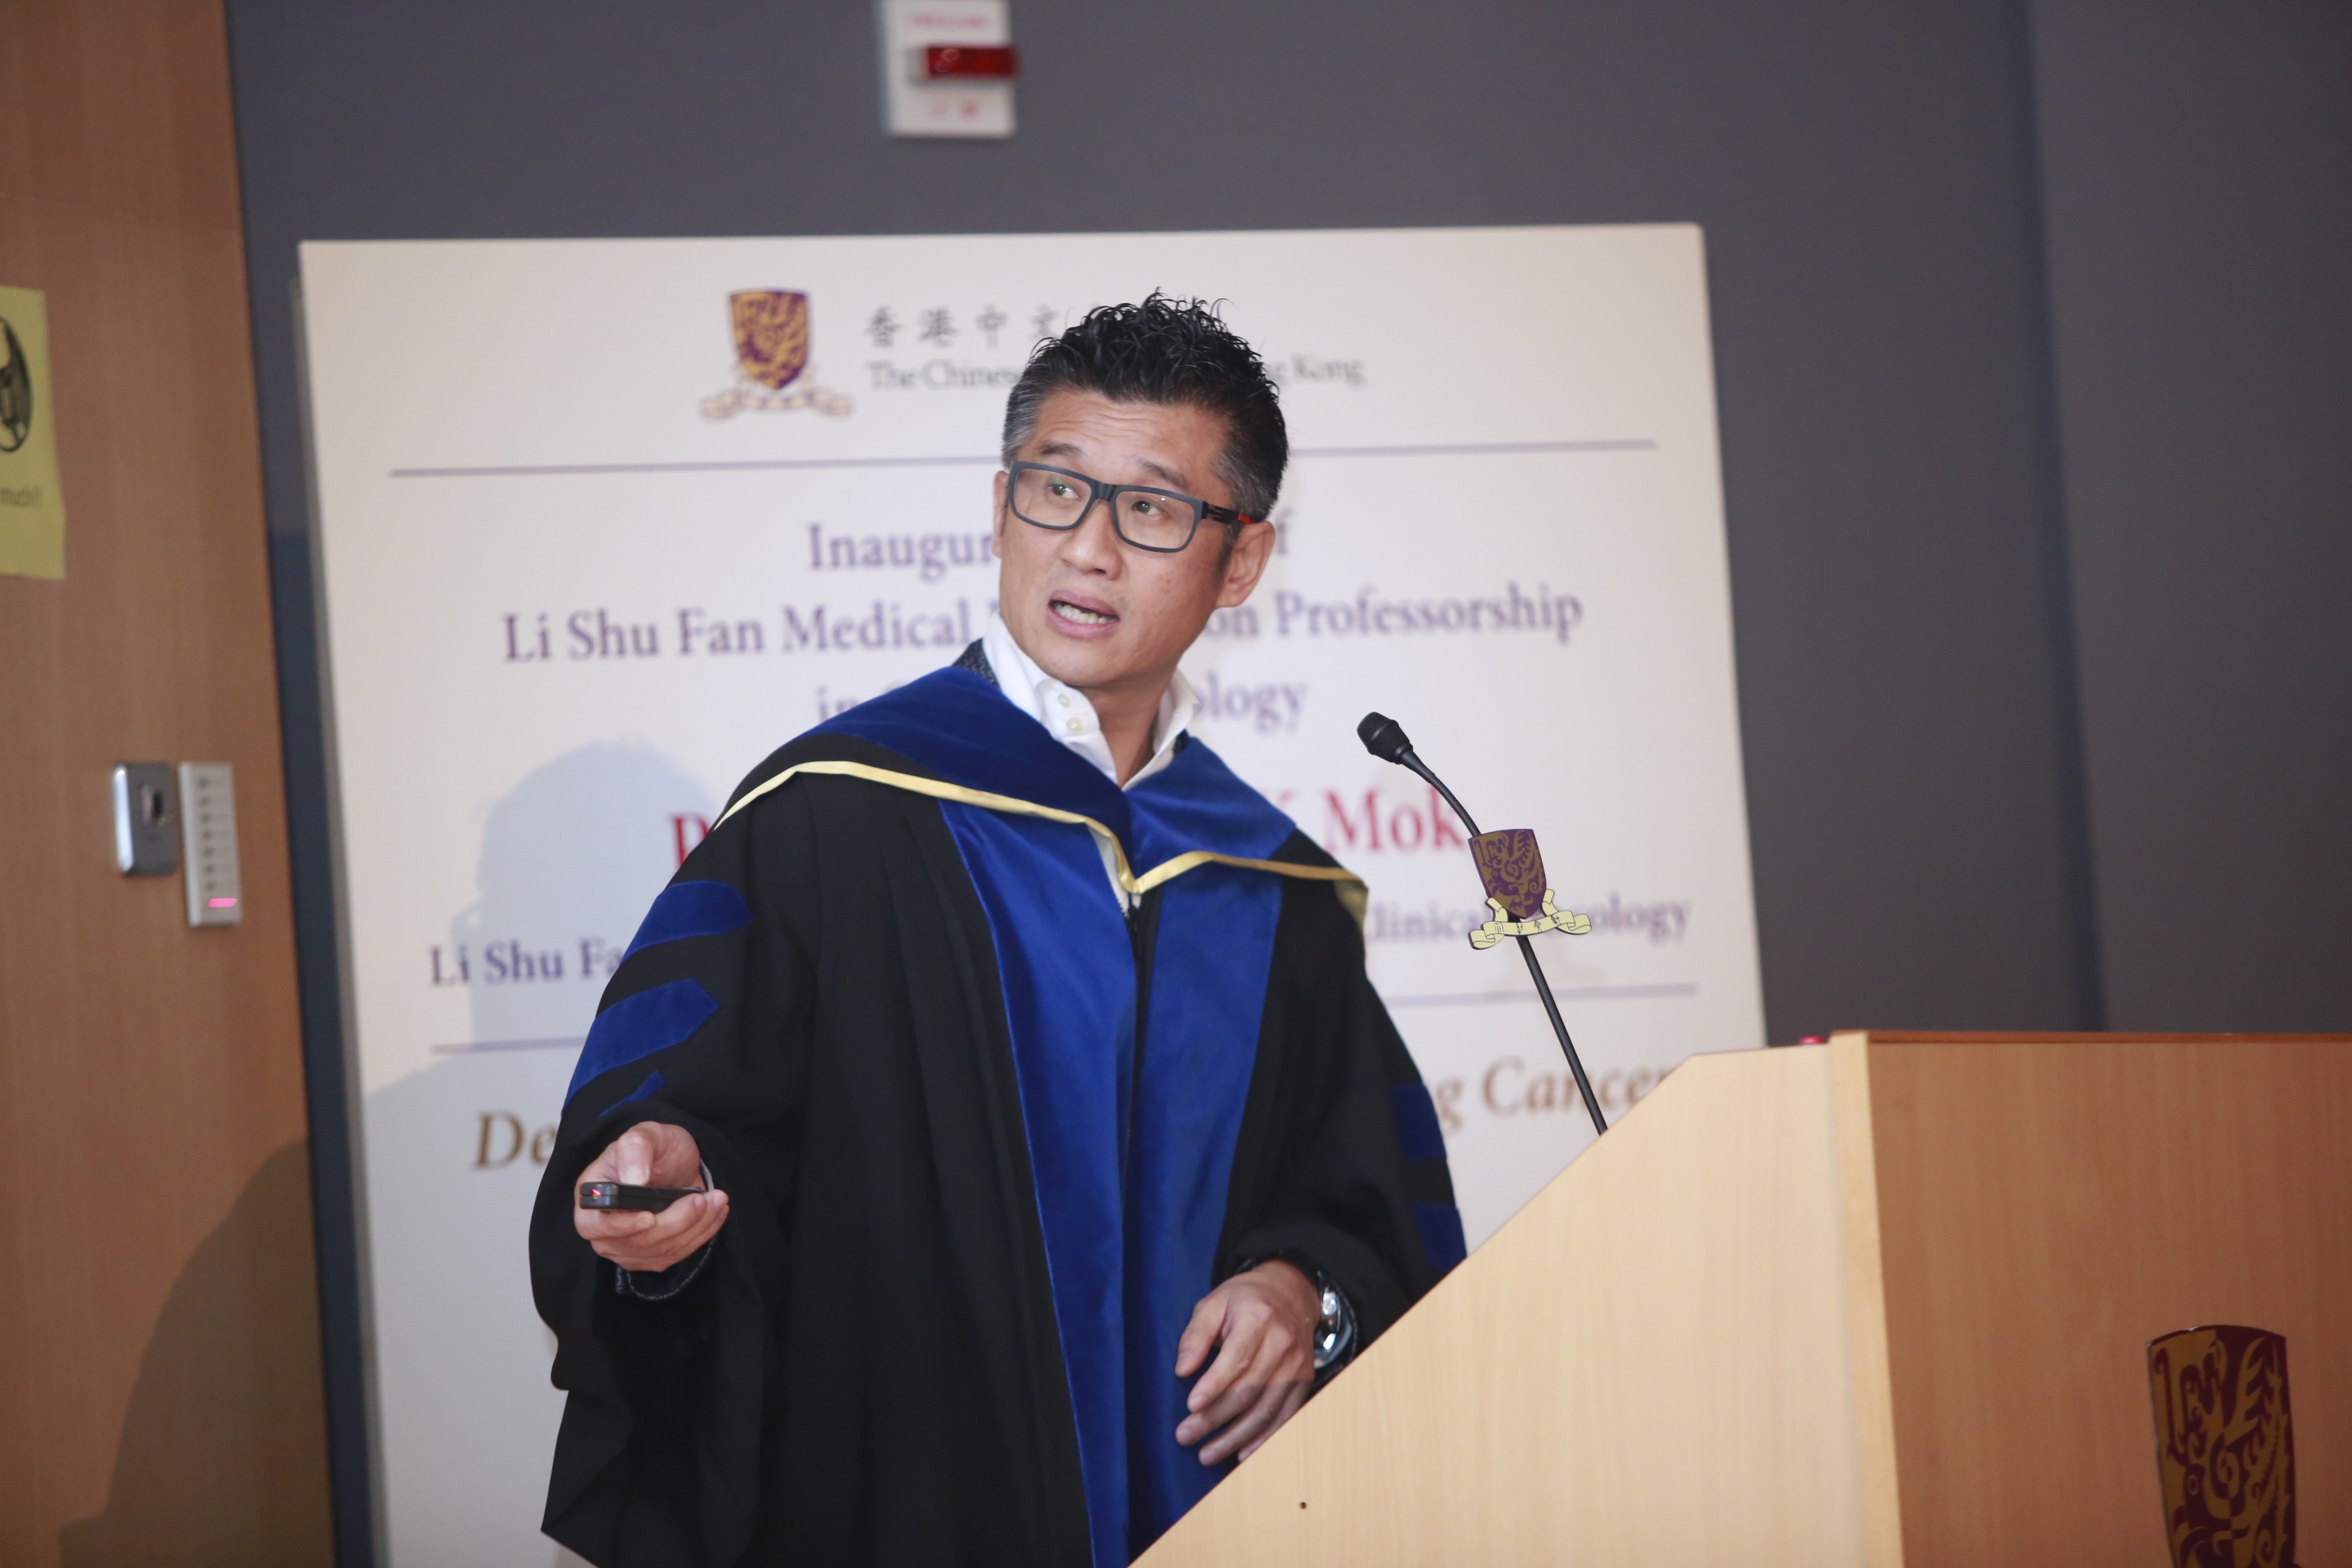 Prof. Tony Mok delivers his inaugural lecture